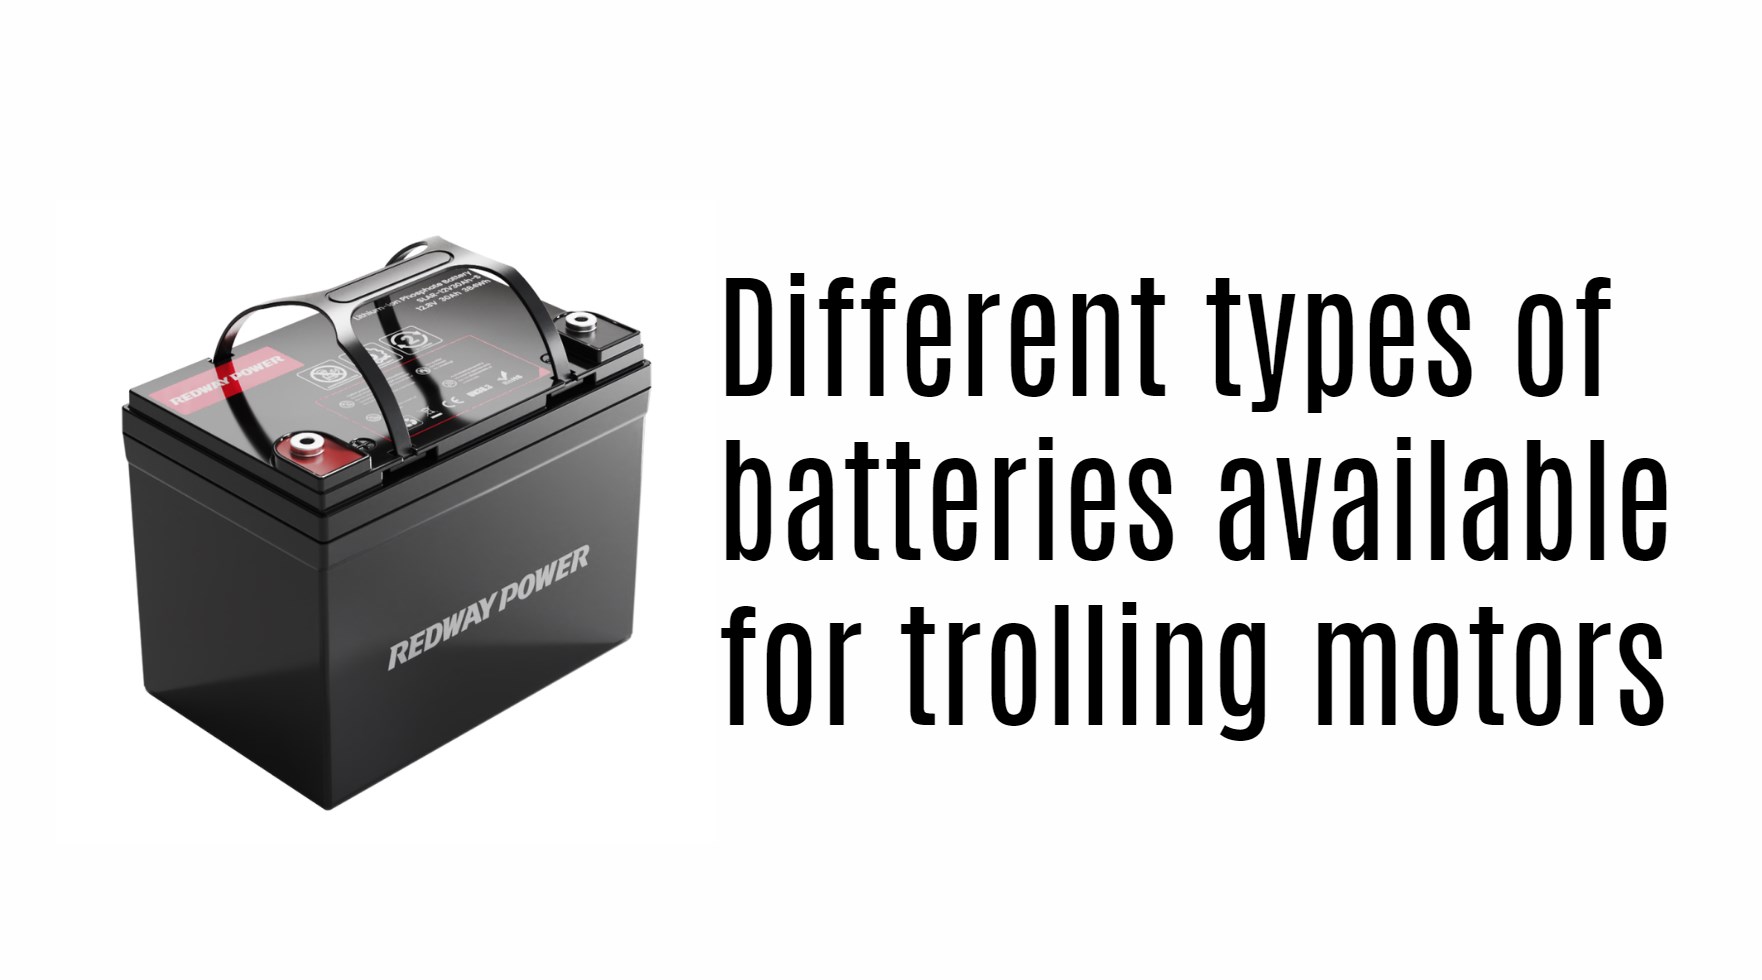 Different types of batteries available for trolling motors